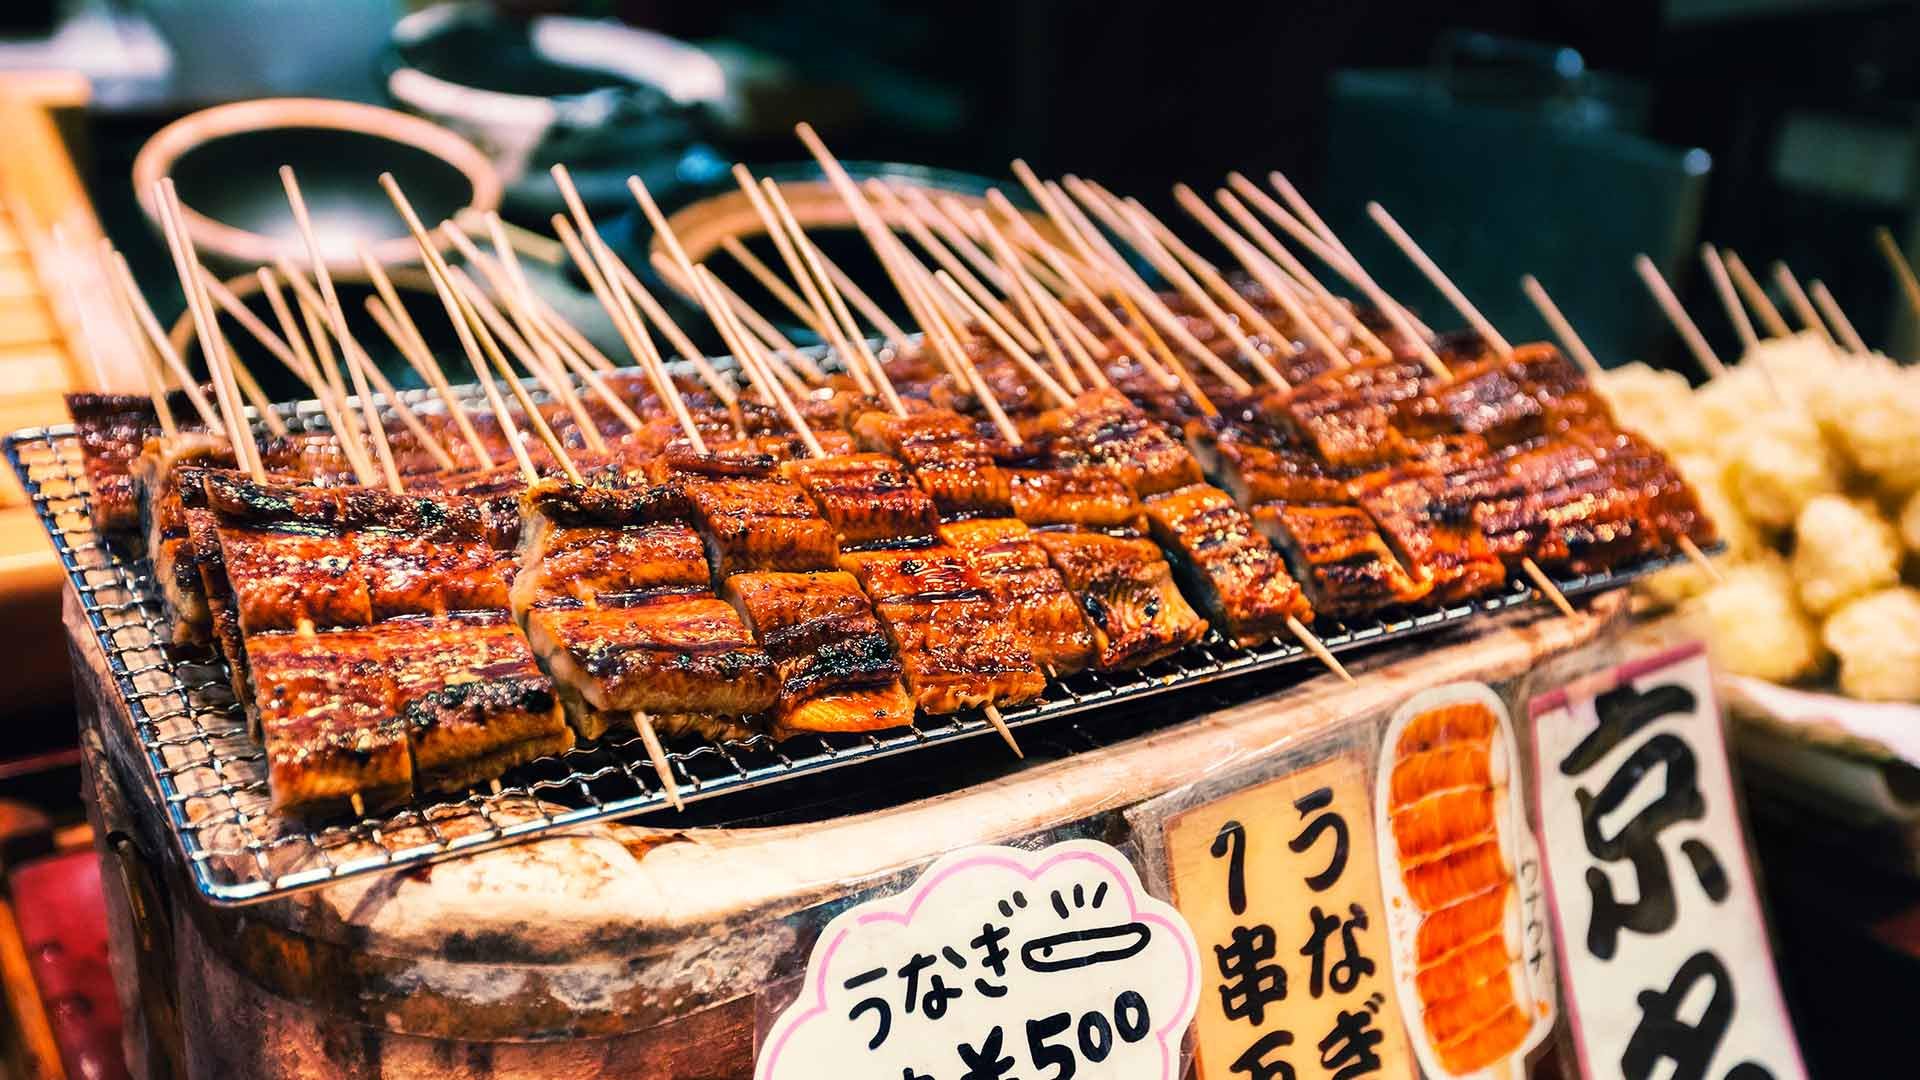 10 Japanese Food Blogs to Make Your Mouth Water | byFood